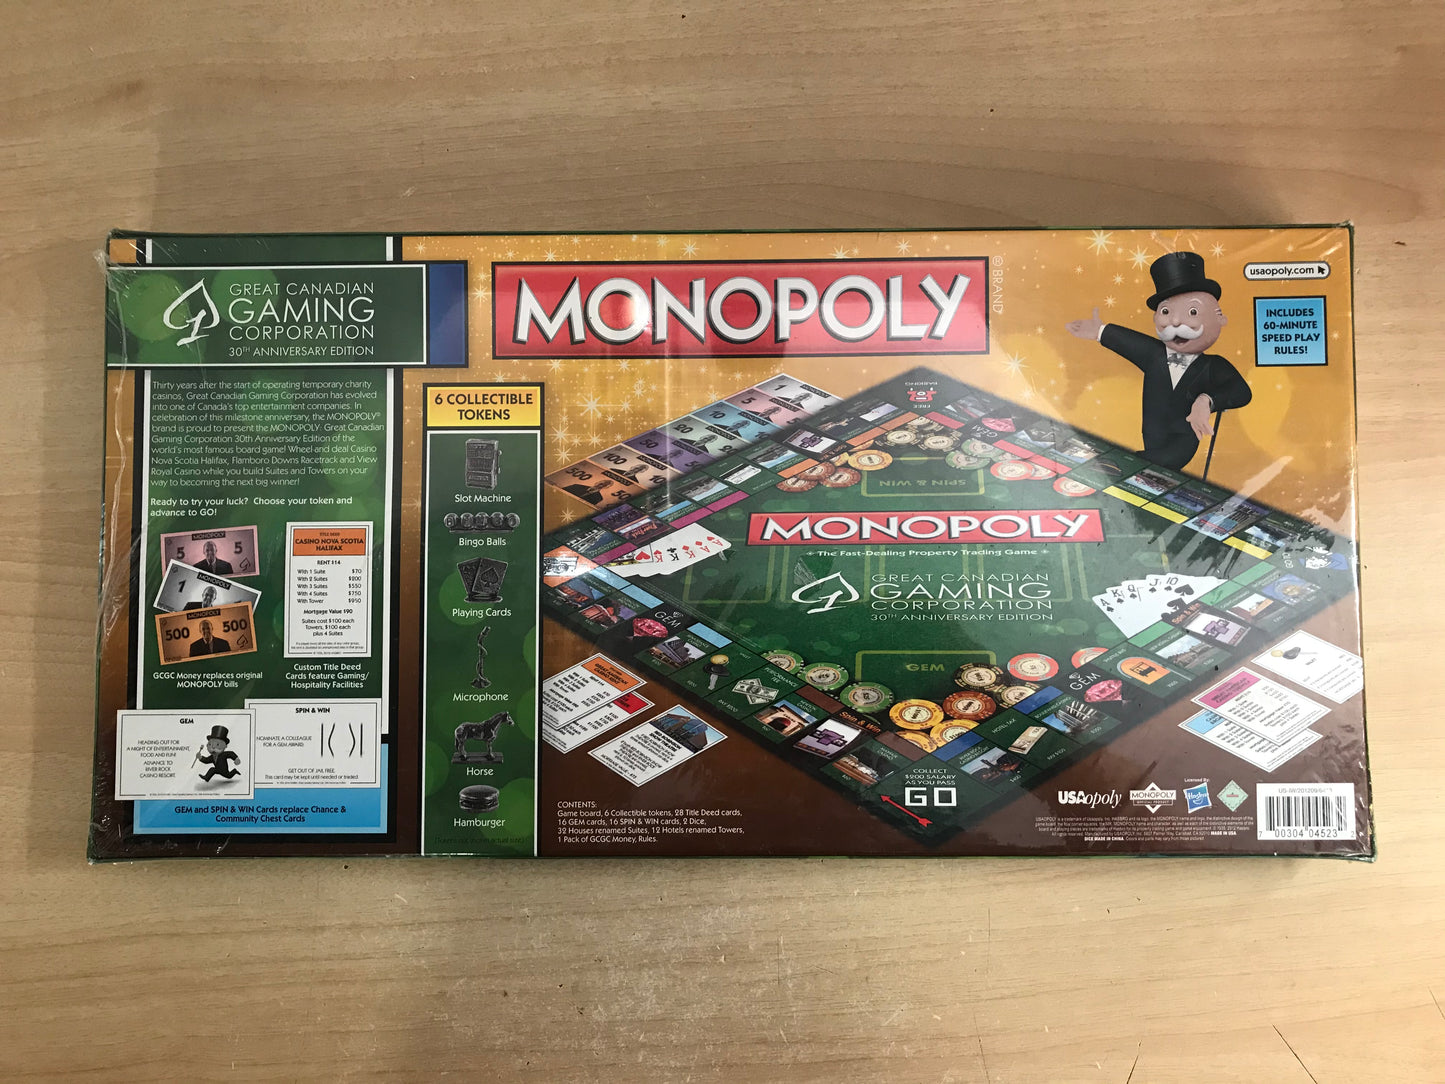 Game Monopoly Great Canadian Gaming Corportation 30th Anniversary Edition New Sealed